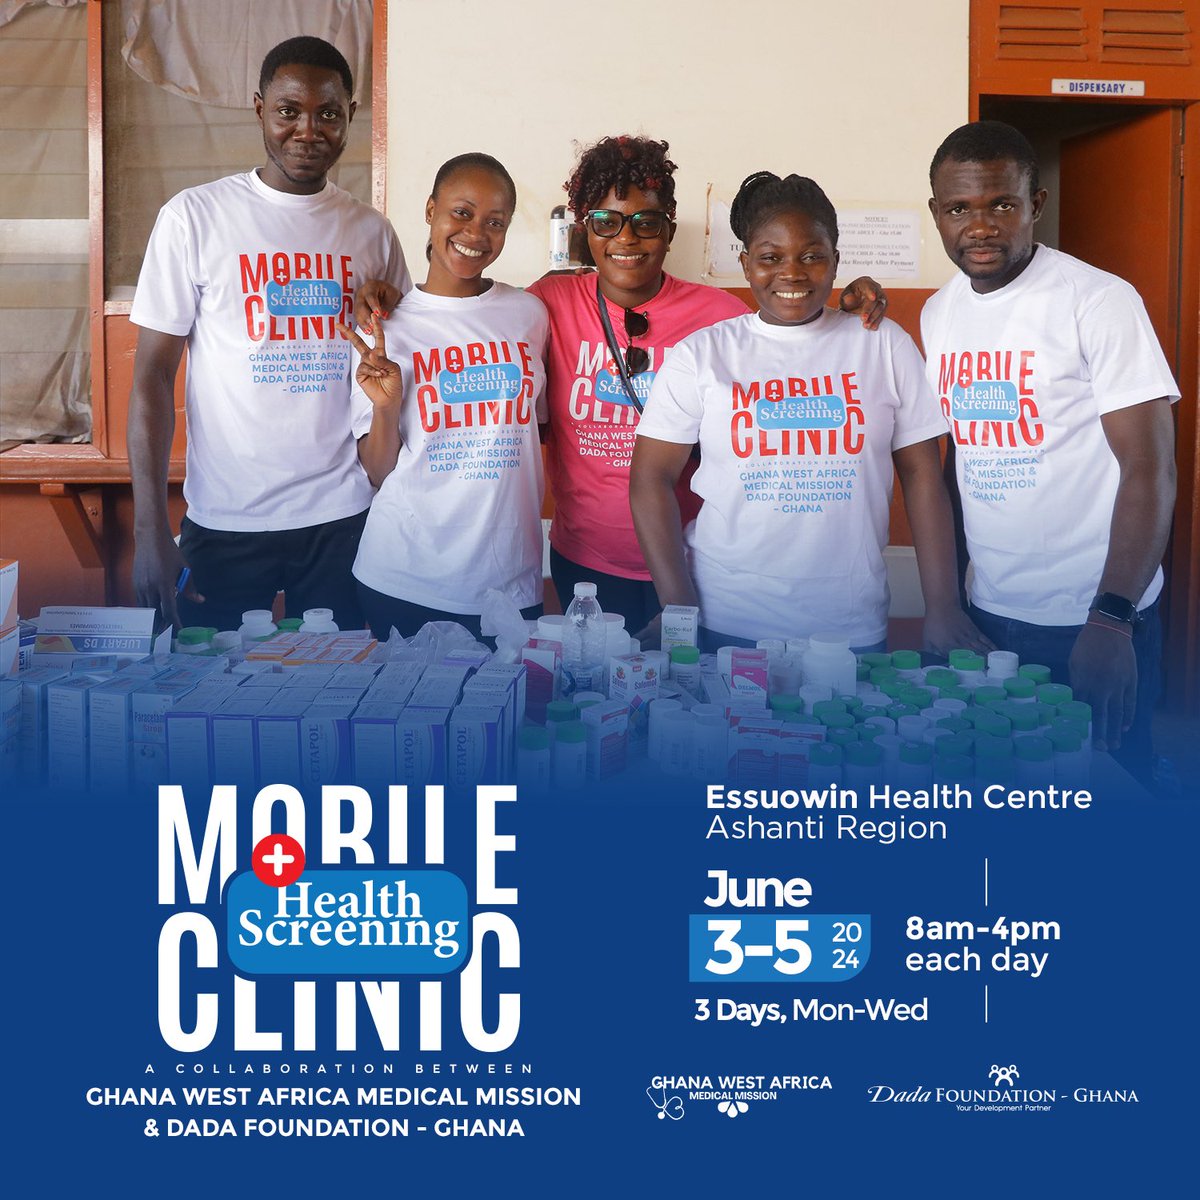 Bringing healthcare closer to homes! Our health screening project is coming to Essuowin!

A Ghana West Africa Medical Mission initiative in partnership with Dada Foundation-Ghana 

#GWAMM
#HealthScreening
#DadaFoundationgh